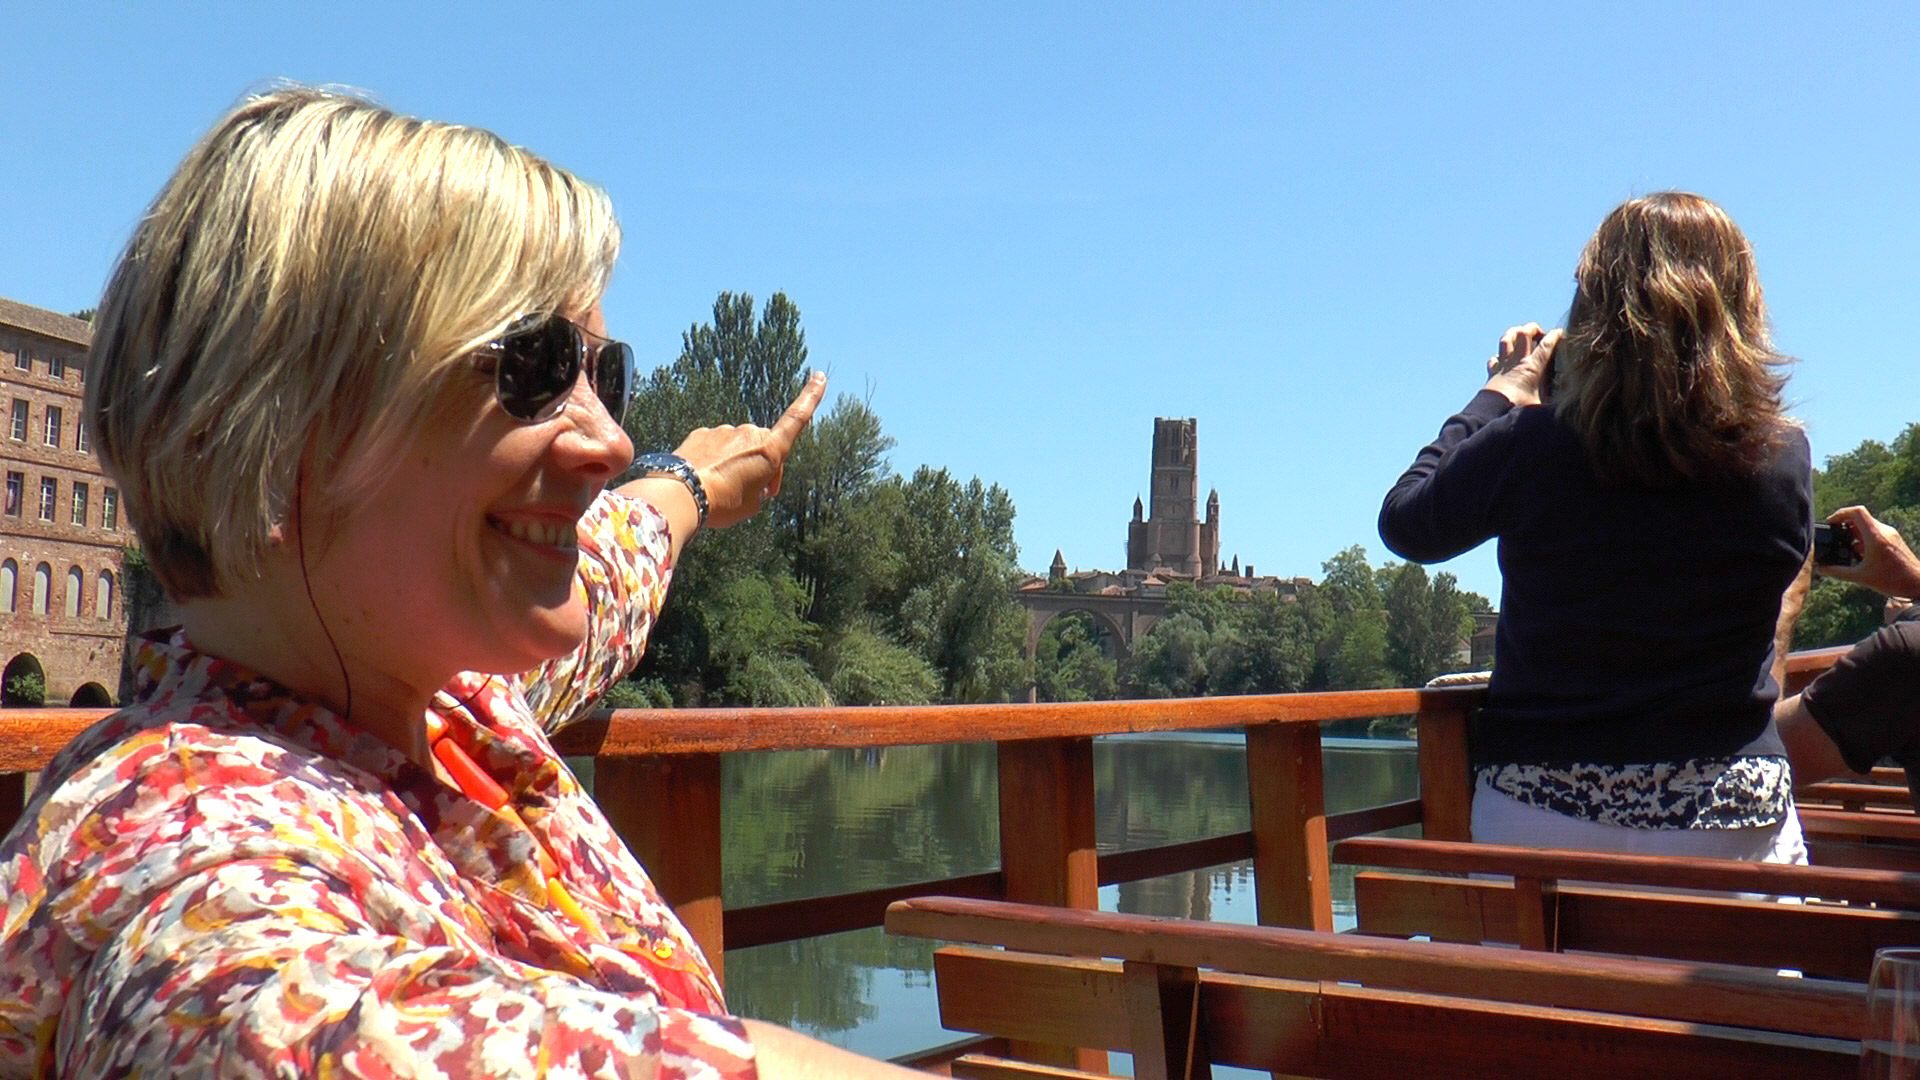 Albi differently from a barge cruise on the Tarn - in summer